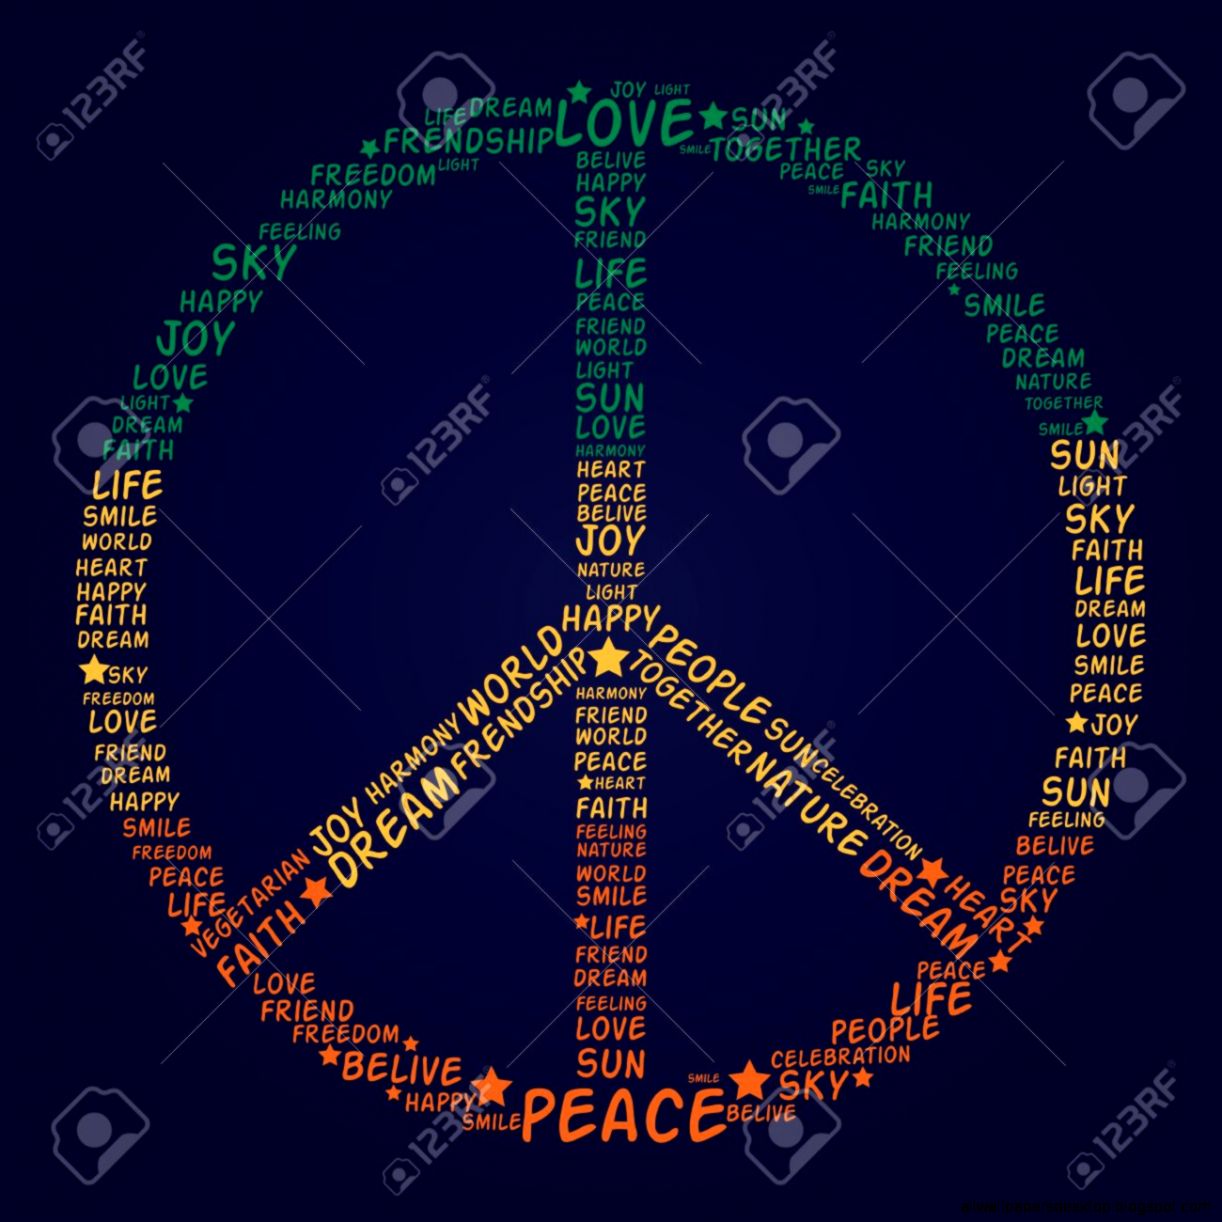 Peace Symbol Hd Wallpapers 47 Images - Peace Sign , HD Wallpaper & Backgrounds